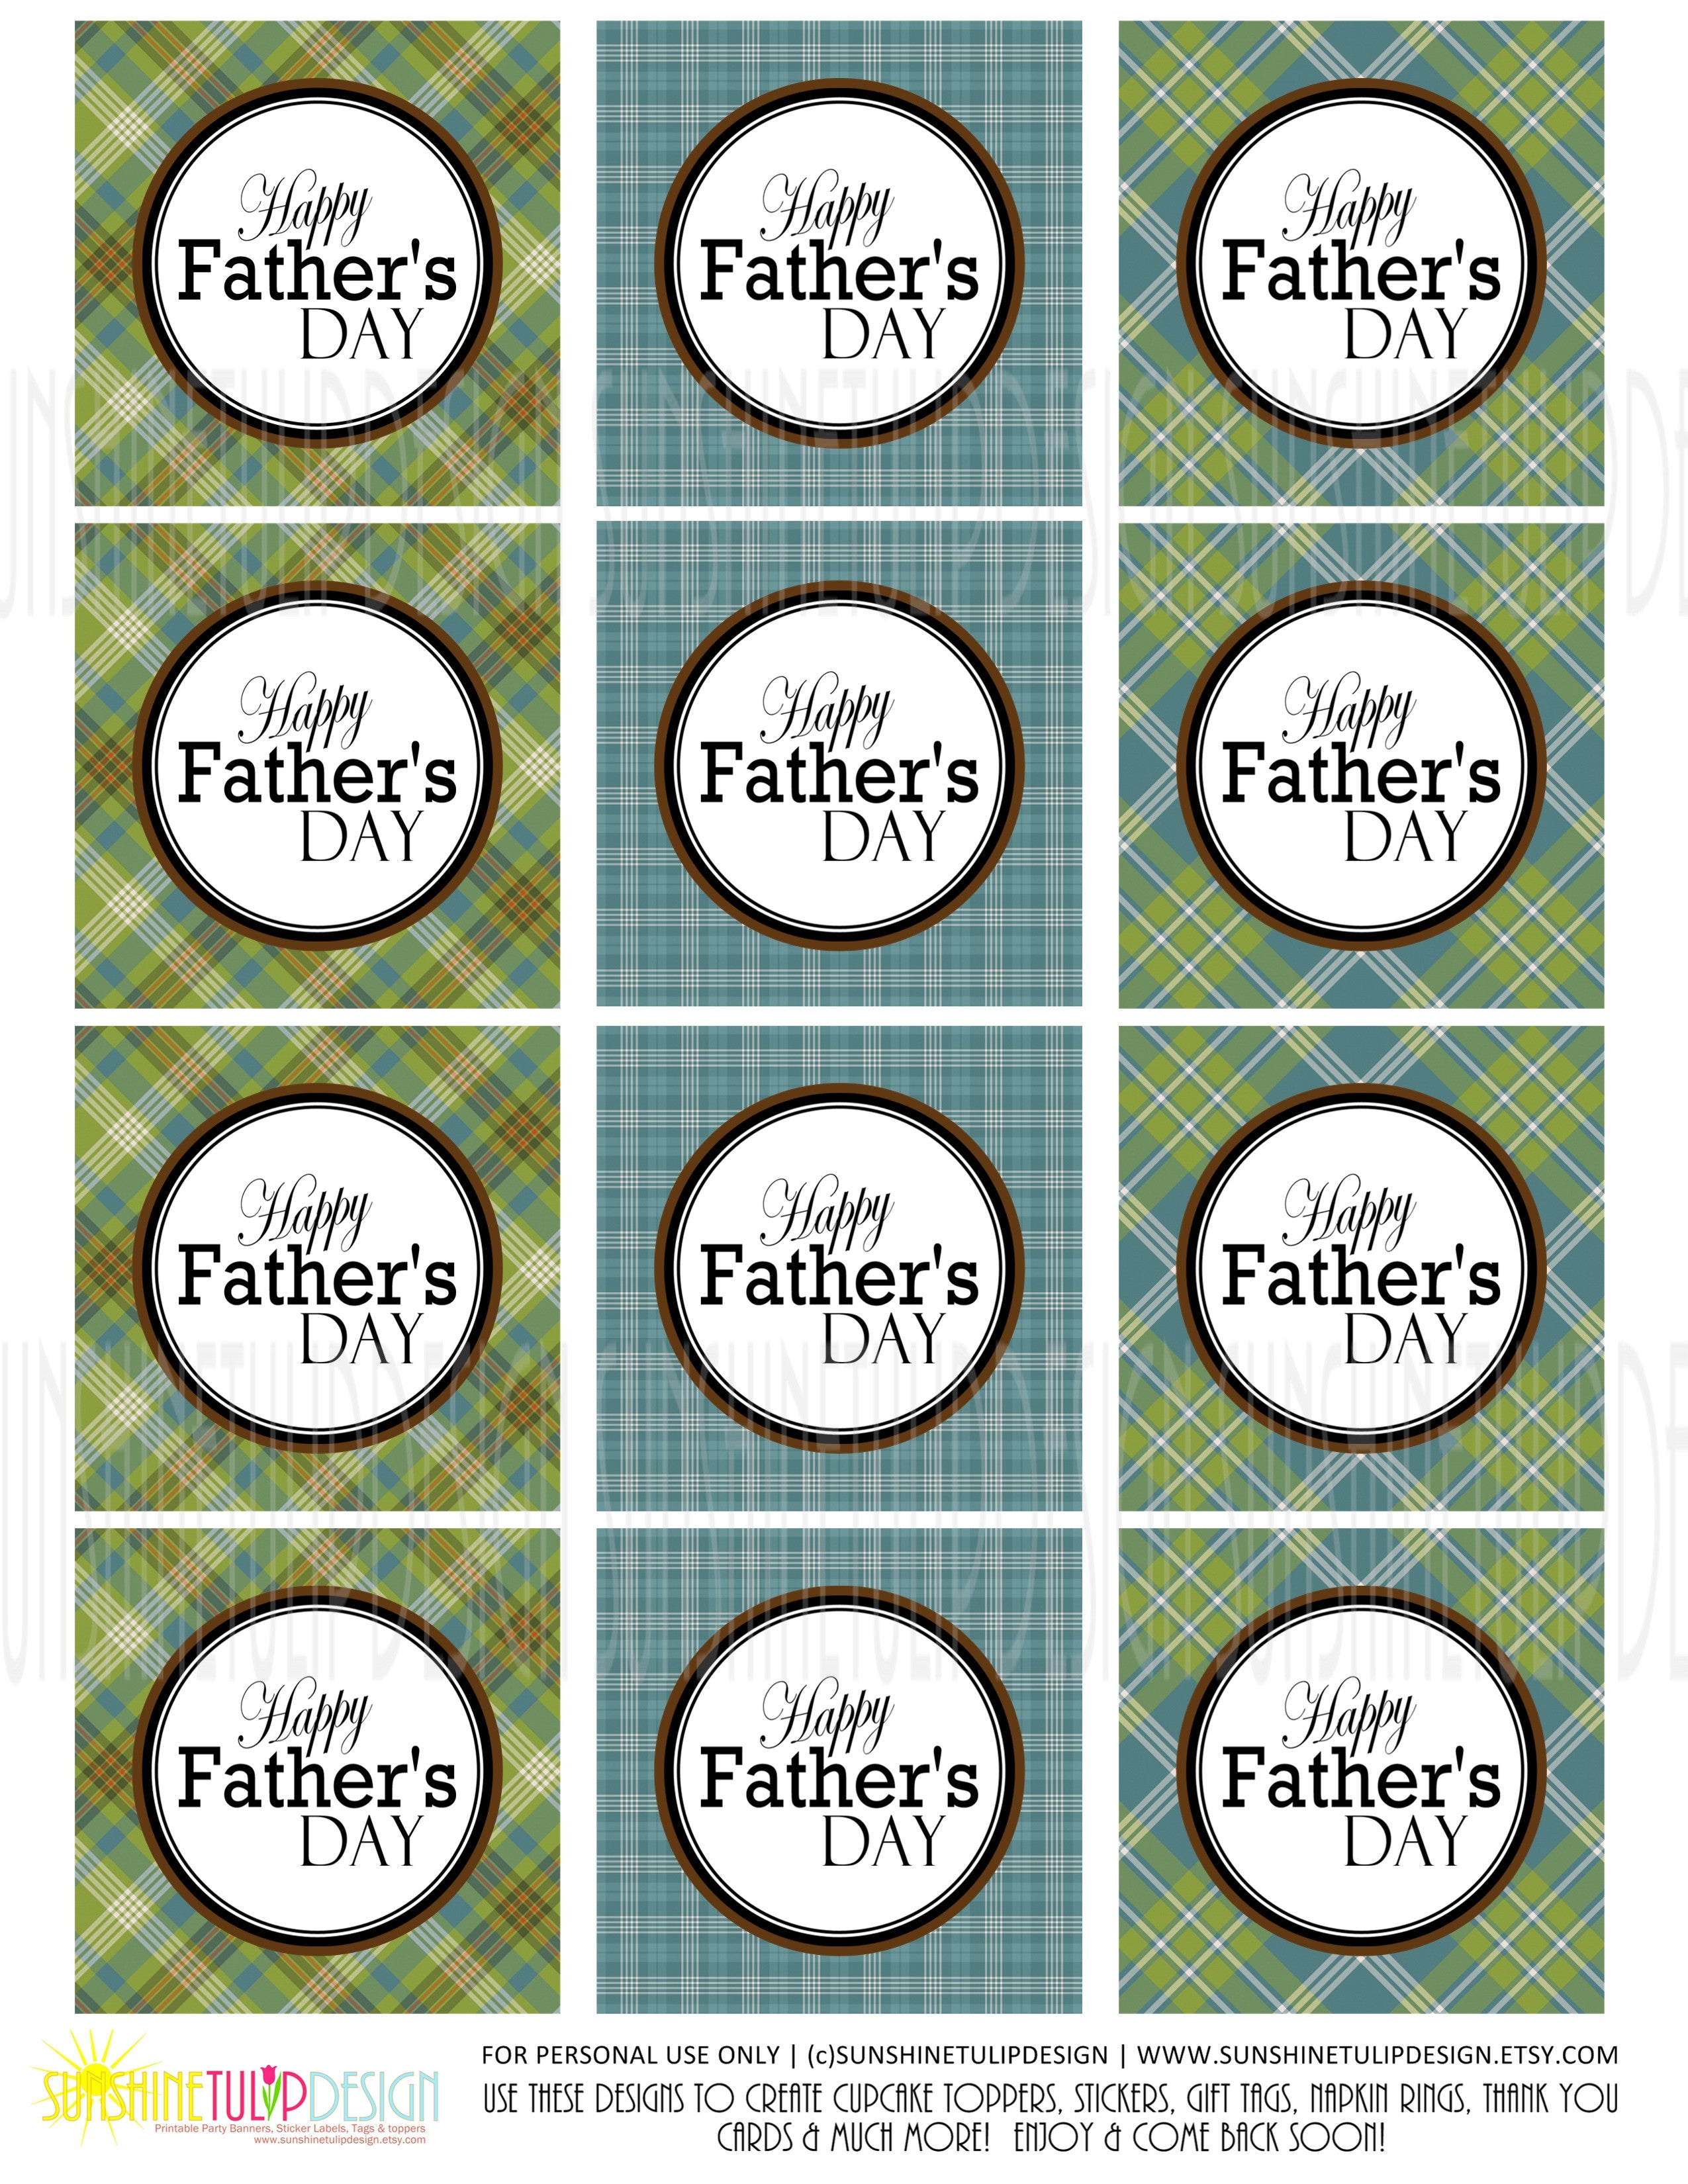 free-downloadable-gift-tags-for-father-s-day-graduation-and-weddings